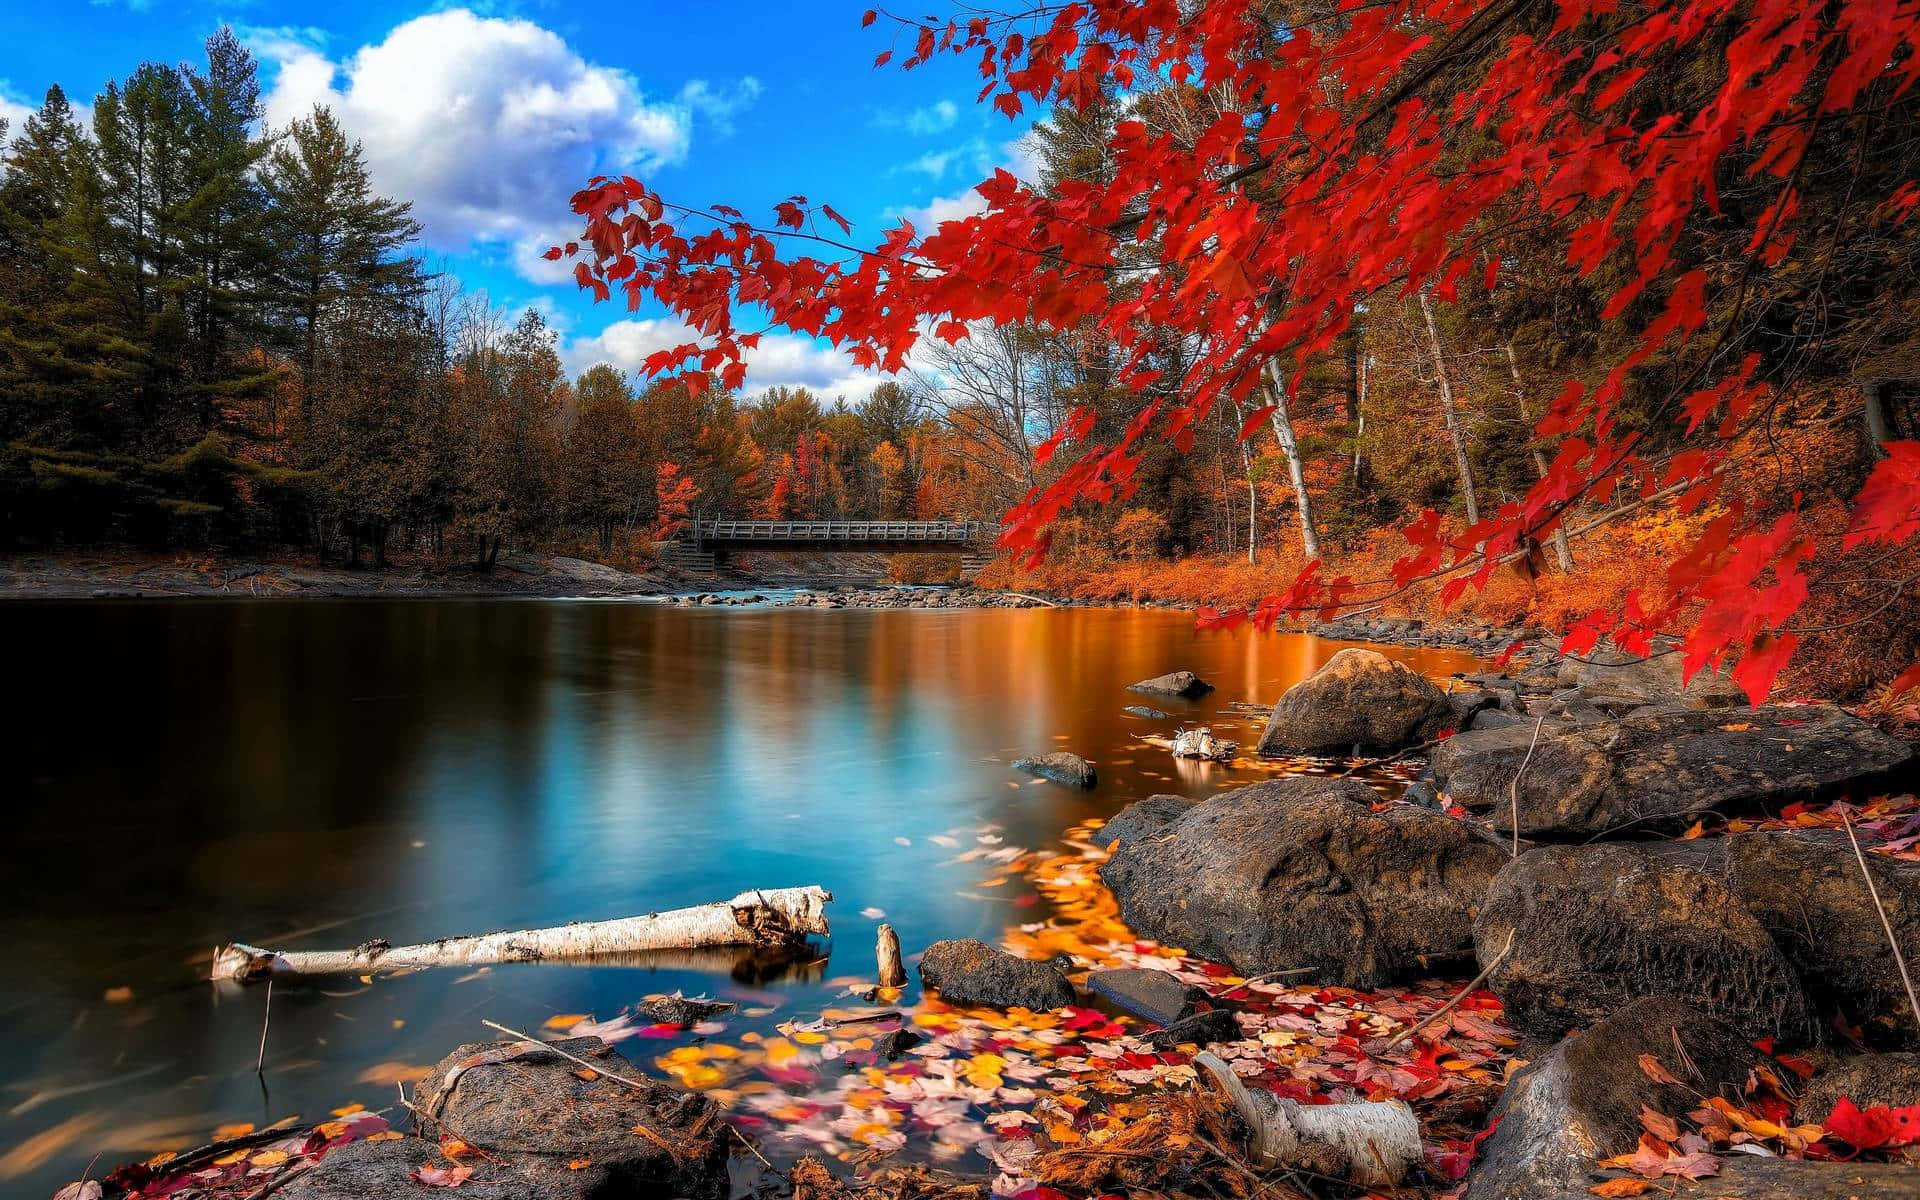 Take in the beauty of Nature in Fall